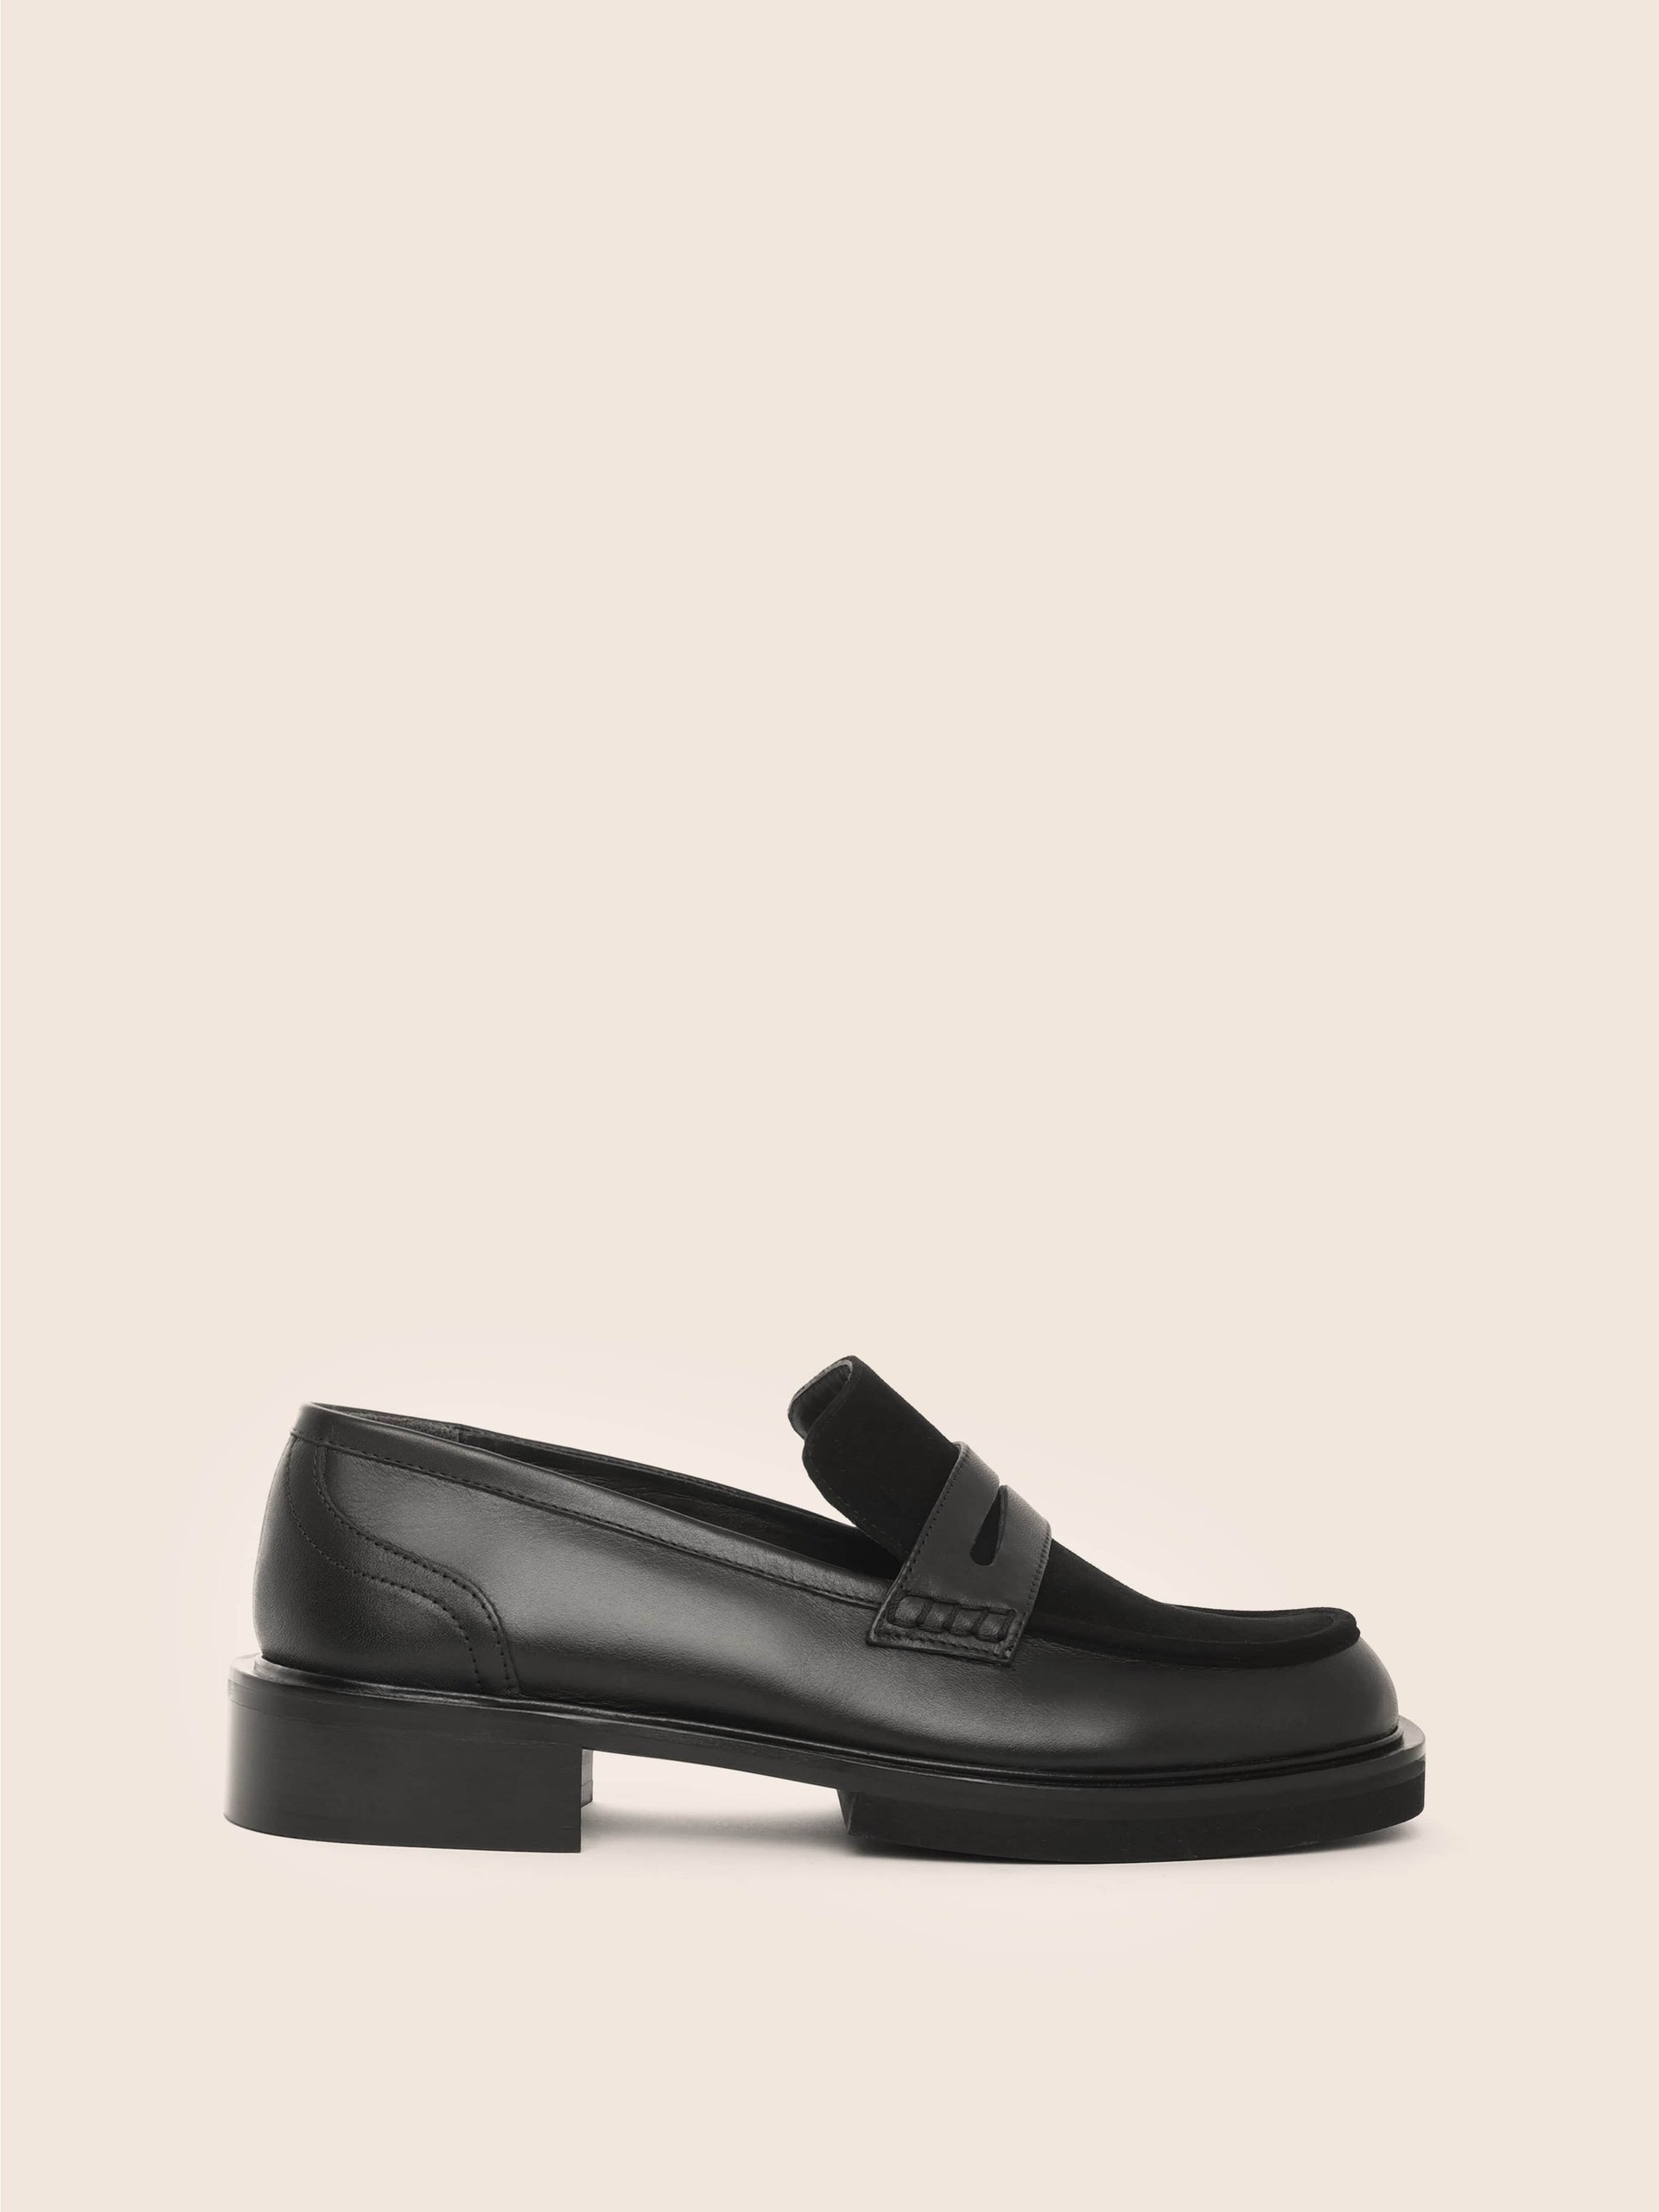 Soza Black Penny Loafer | Maguire Shoes